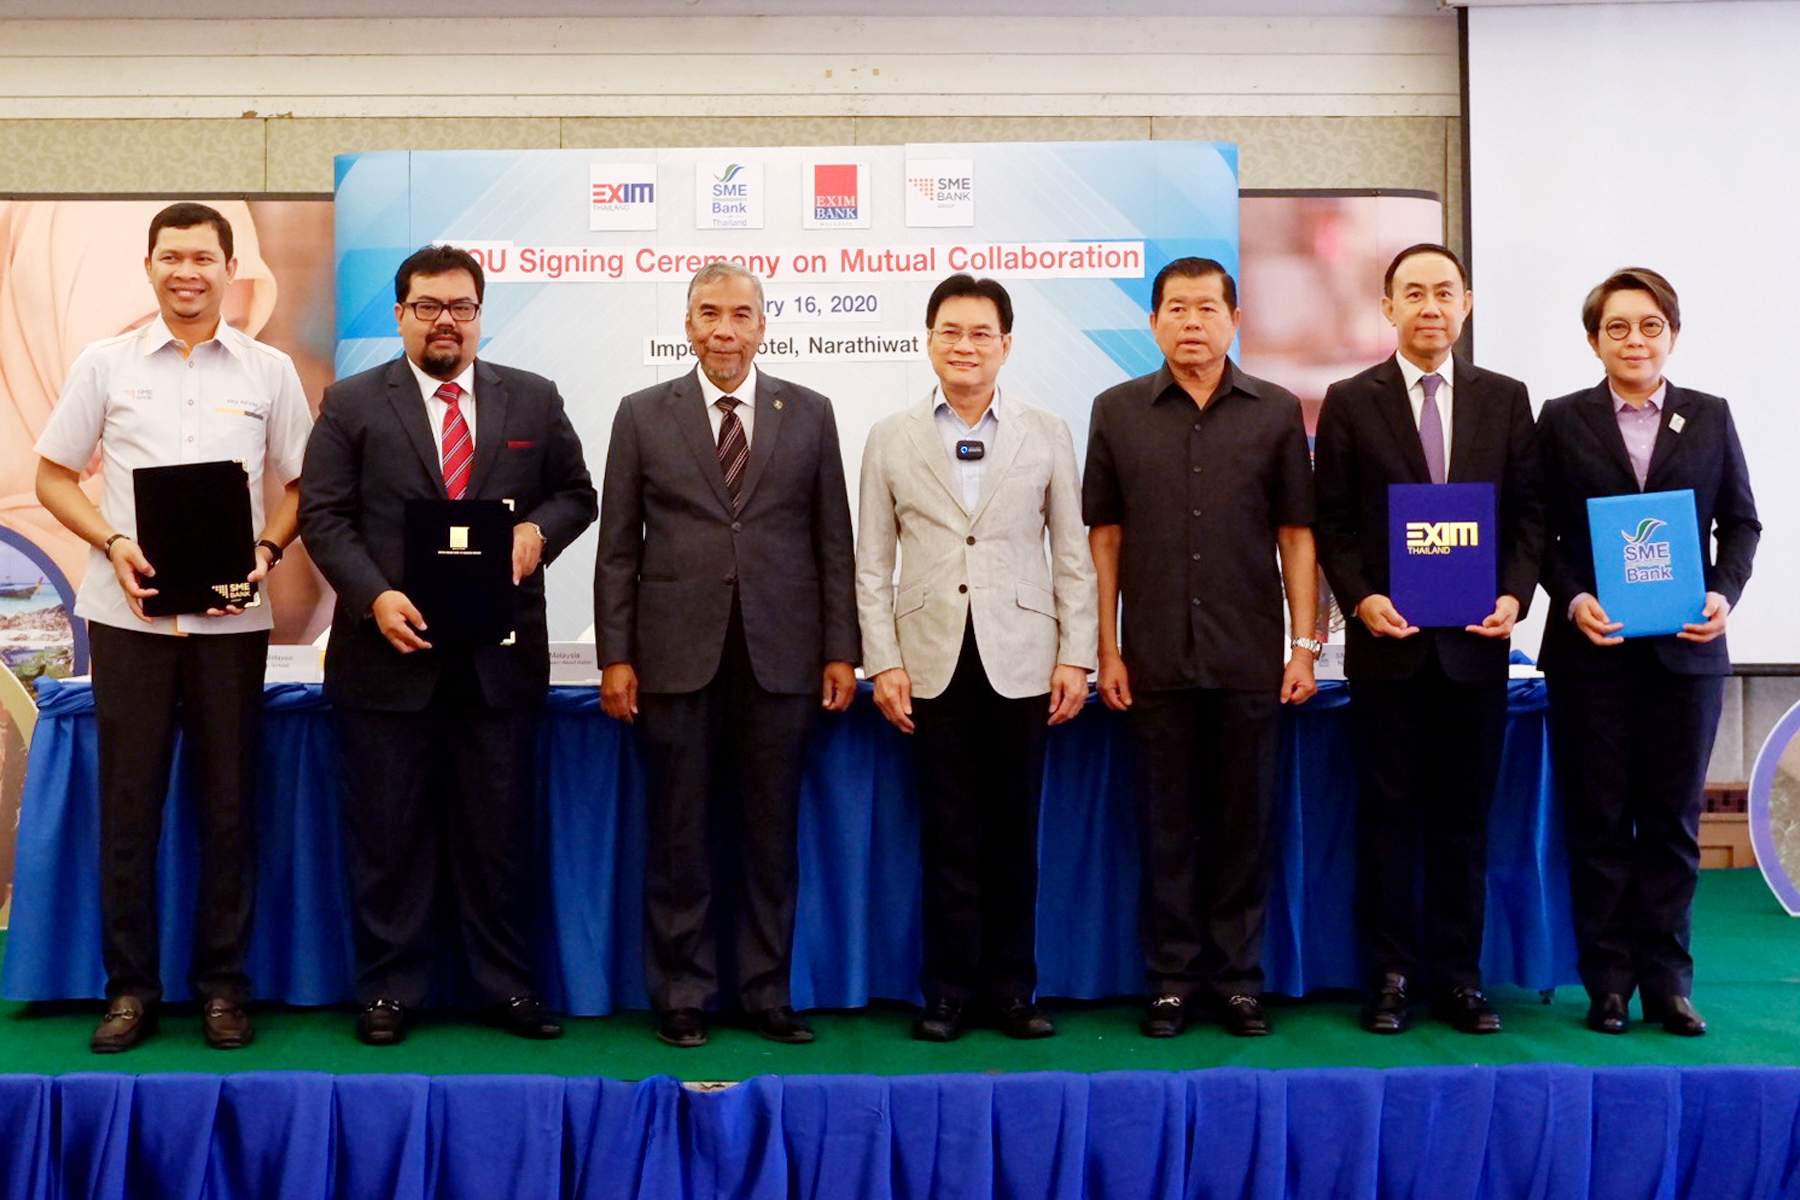 Thailand and Malaysia by EXIM Thailand, SME D Bank, Malaysia EXIM Bank and  SME Bank Malaysia Sign MOUs to Promote Thai-Malaysian Business Capabilities in Global Market Expansion